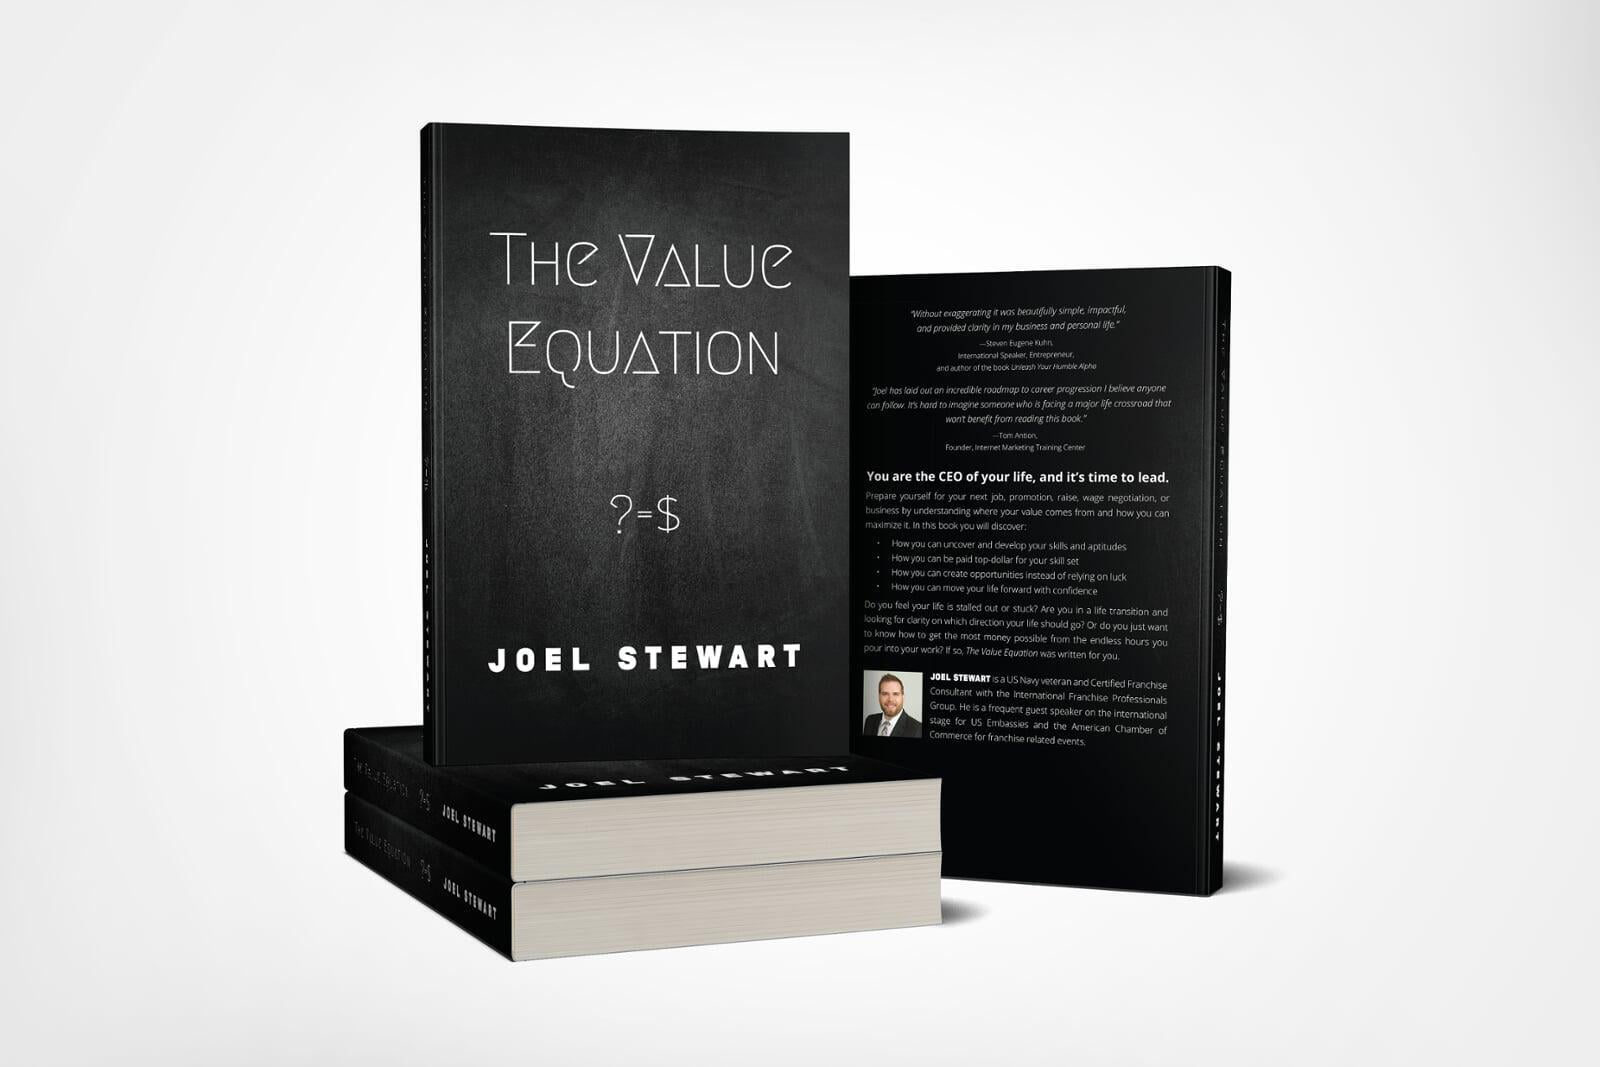 Image of The Value Equation book. Links to product listing on Amazon